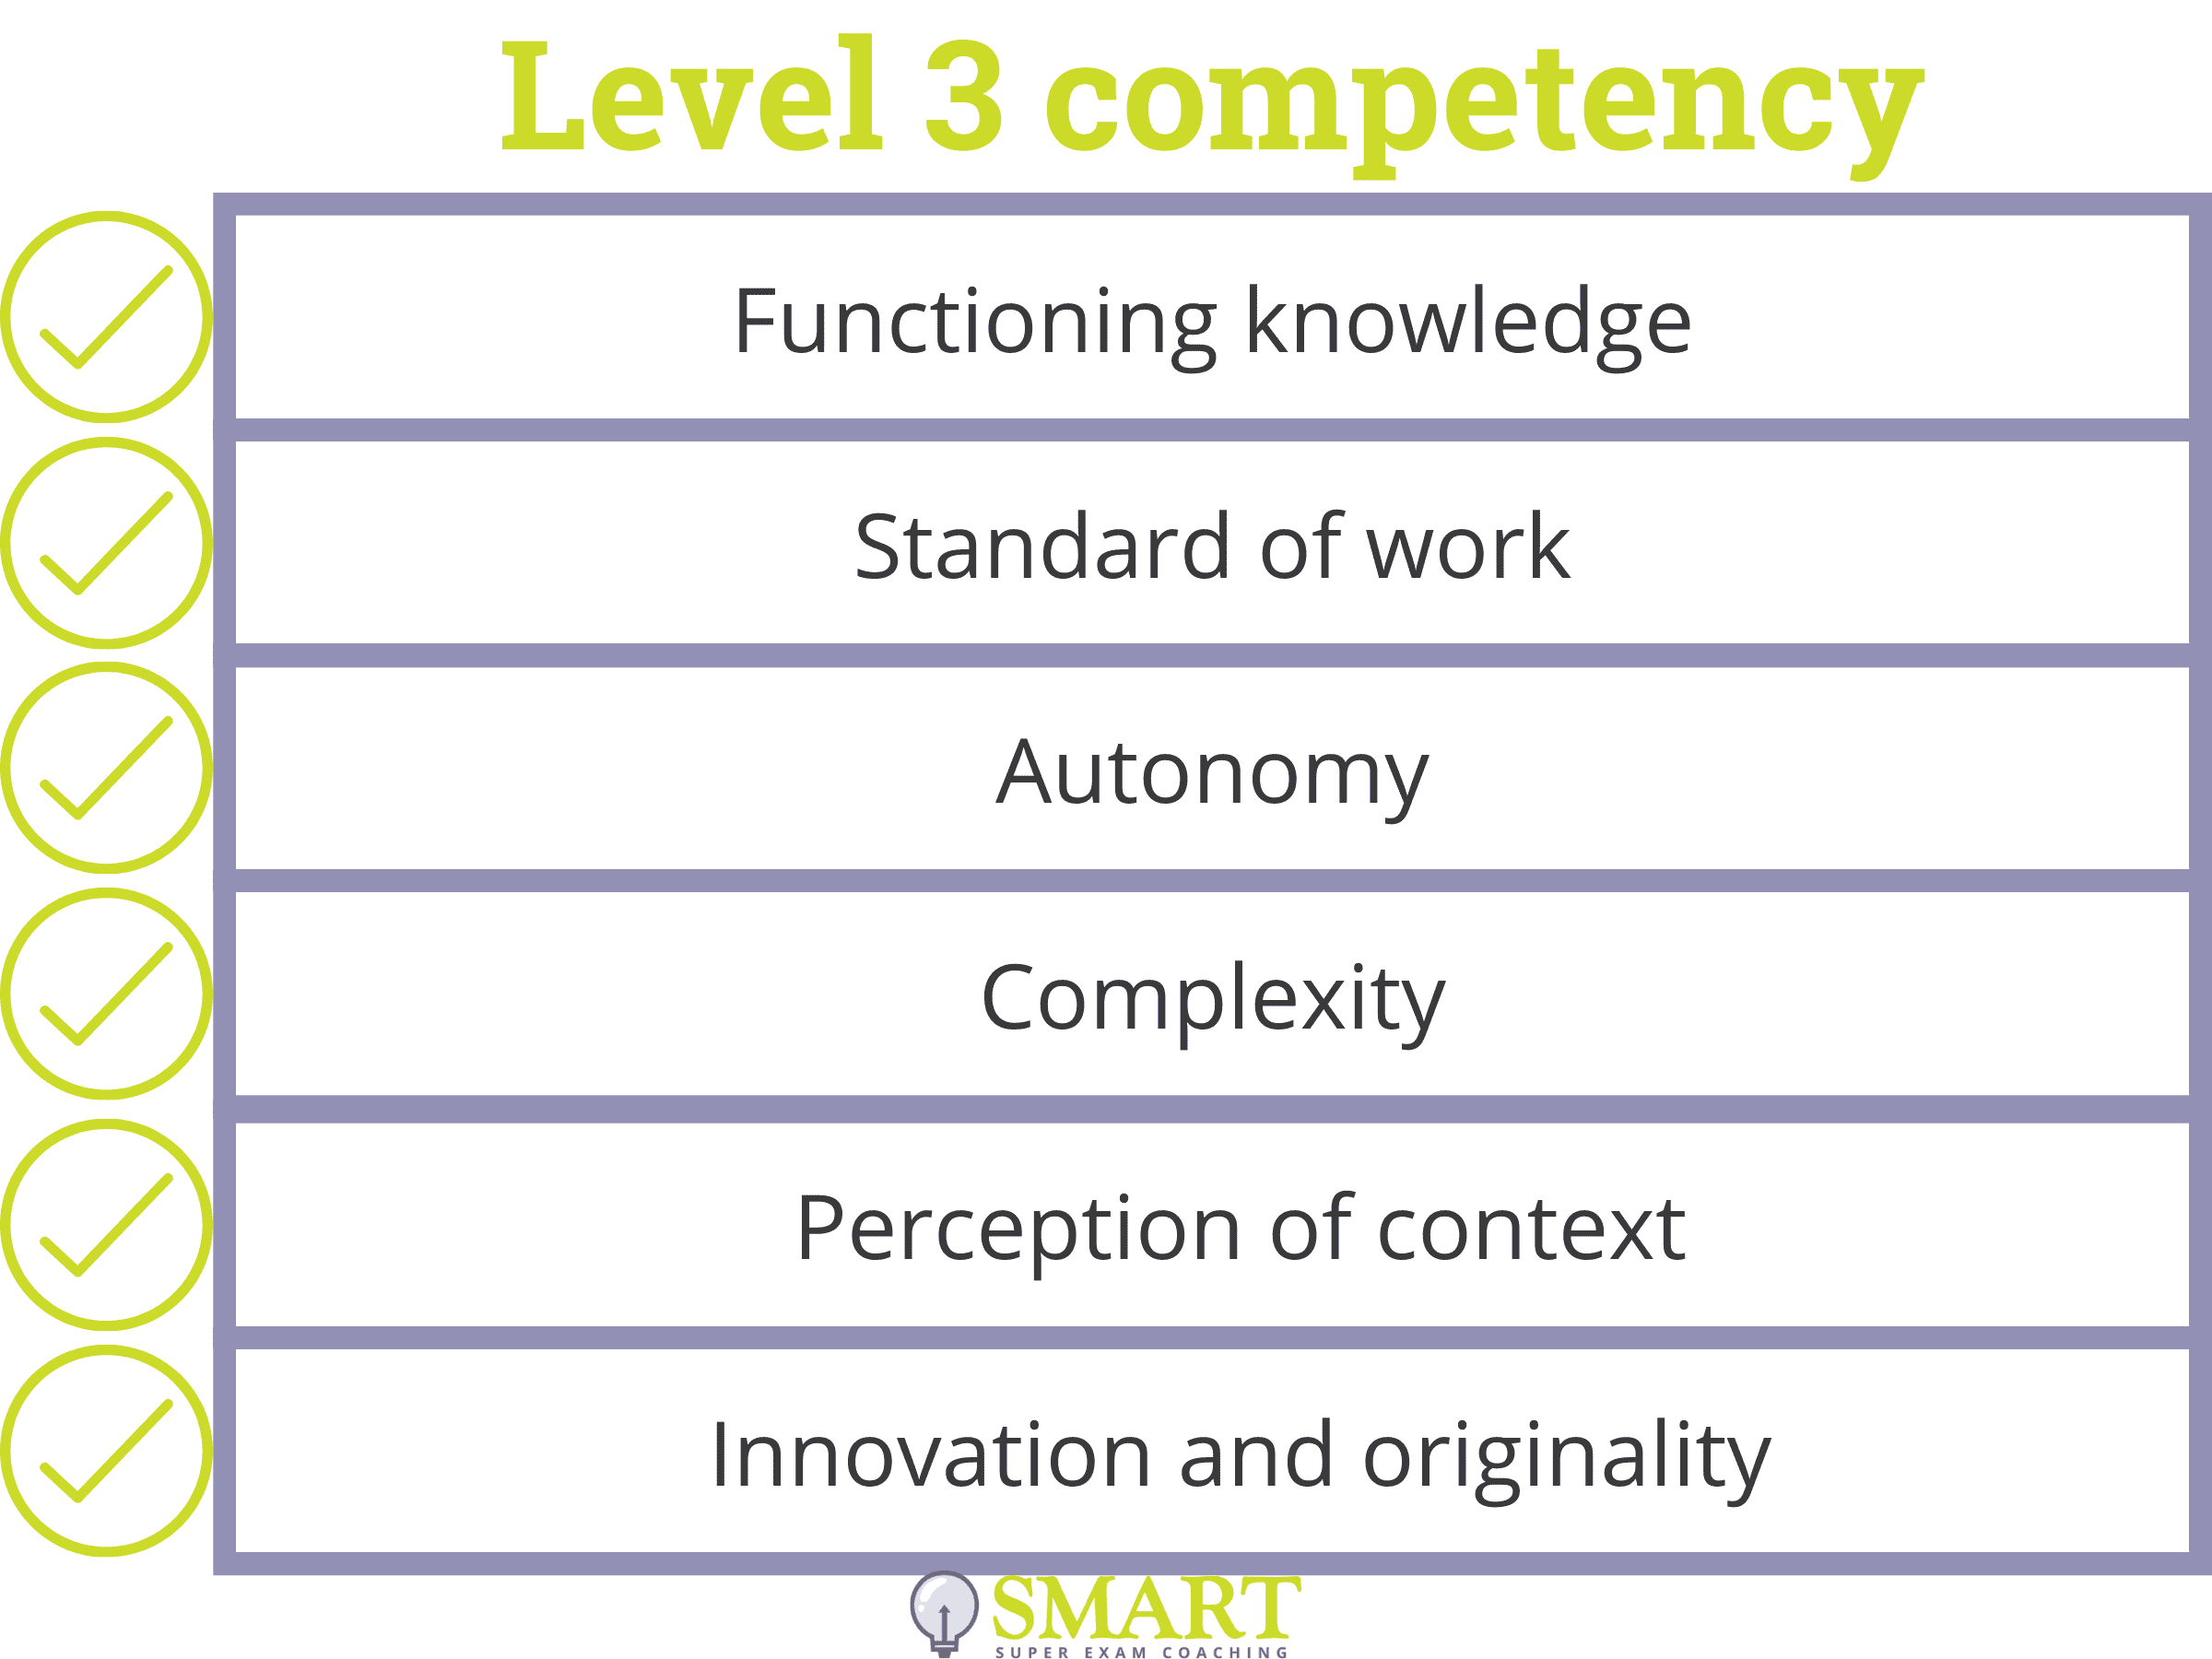 Level 3 Competency